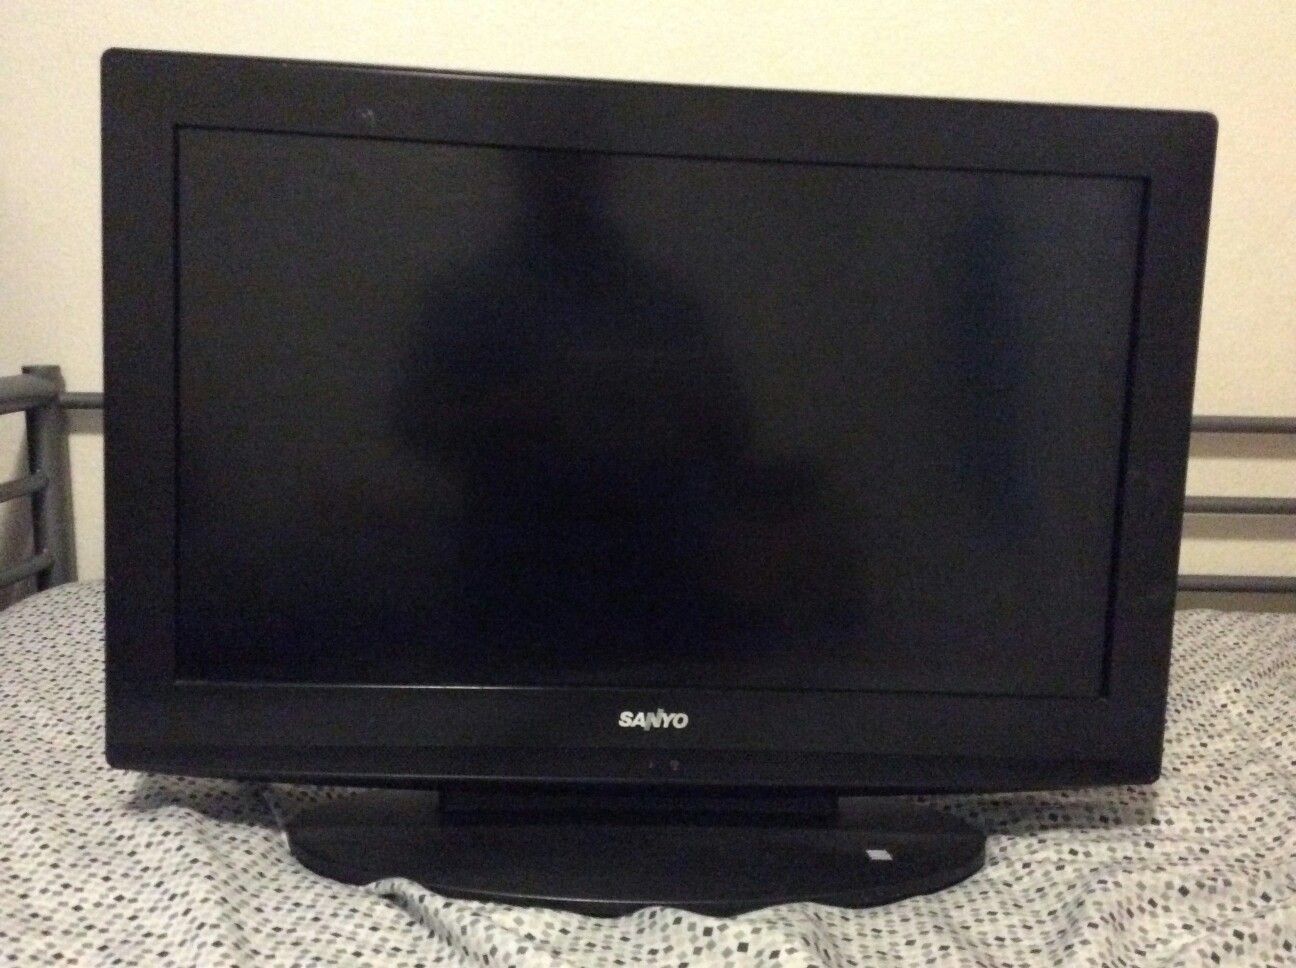 Sanyo flat screen TV and DVD player